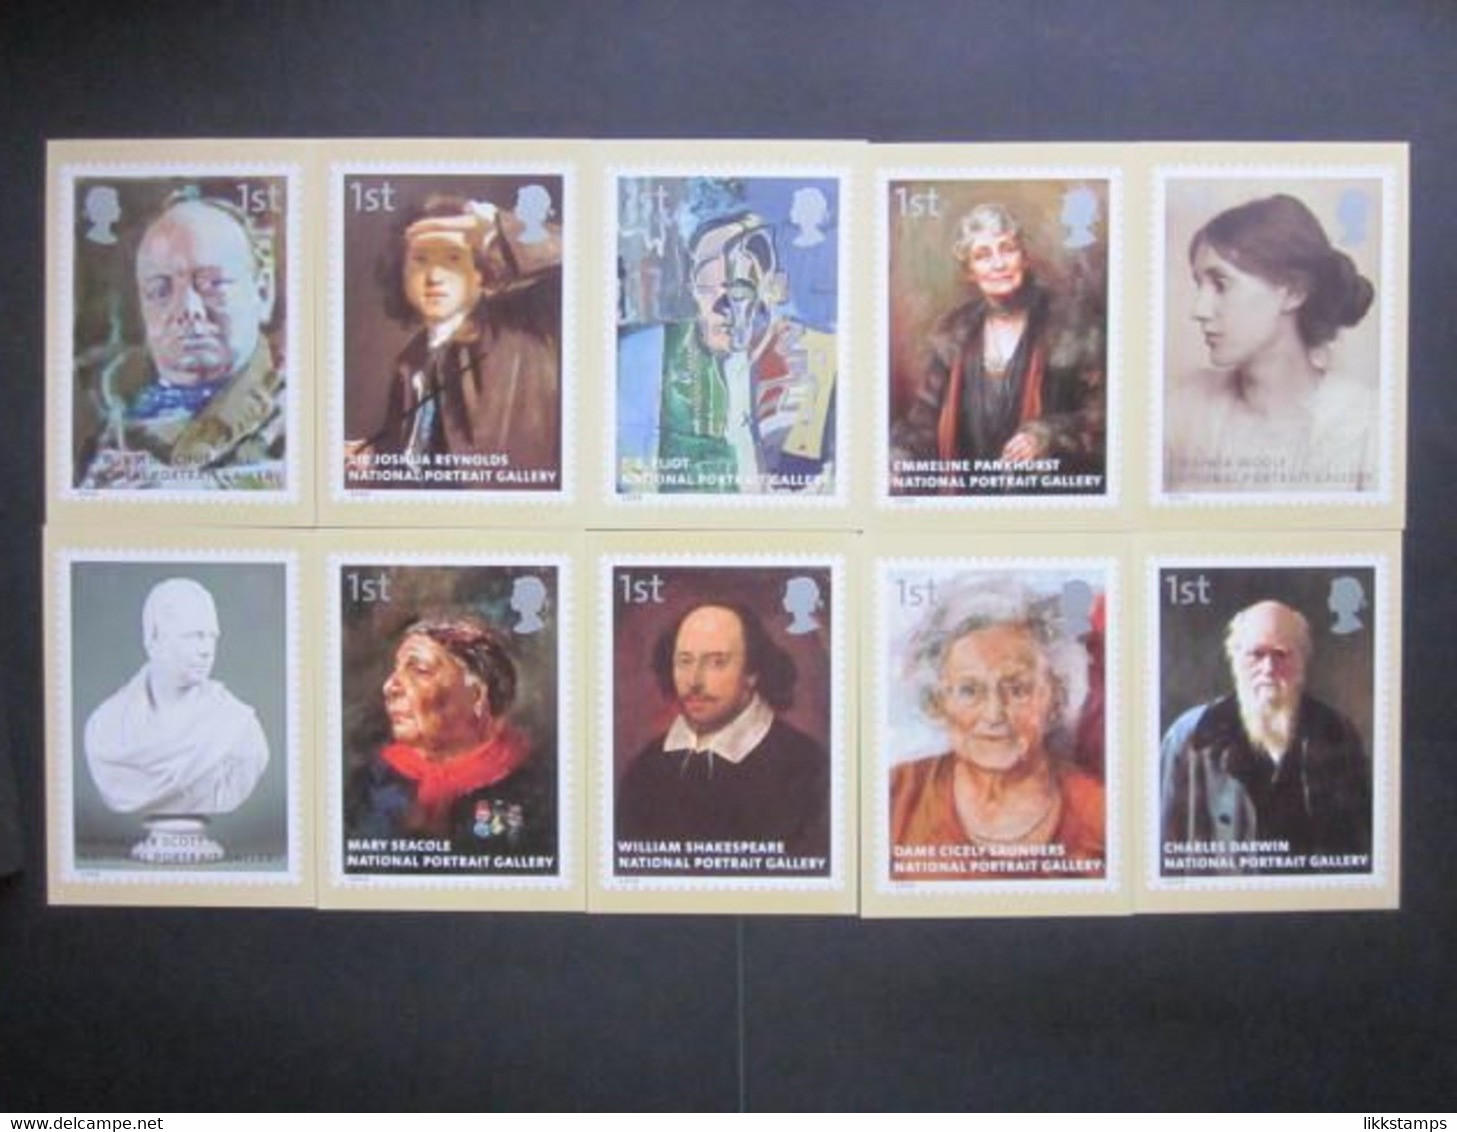 2006 THE NATIONAL PORTRAIT GALLERY, LONDON P.H.Q. CARDS UNUSED, ISSUE No. 289 (B) #00742 - PHQ Cards